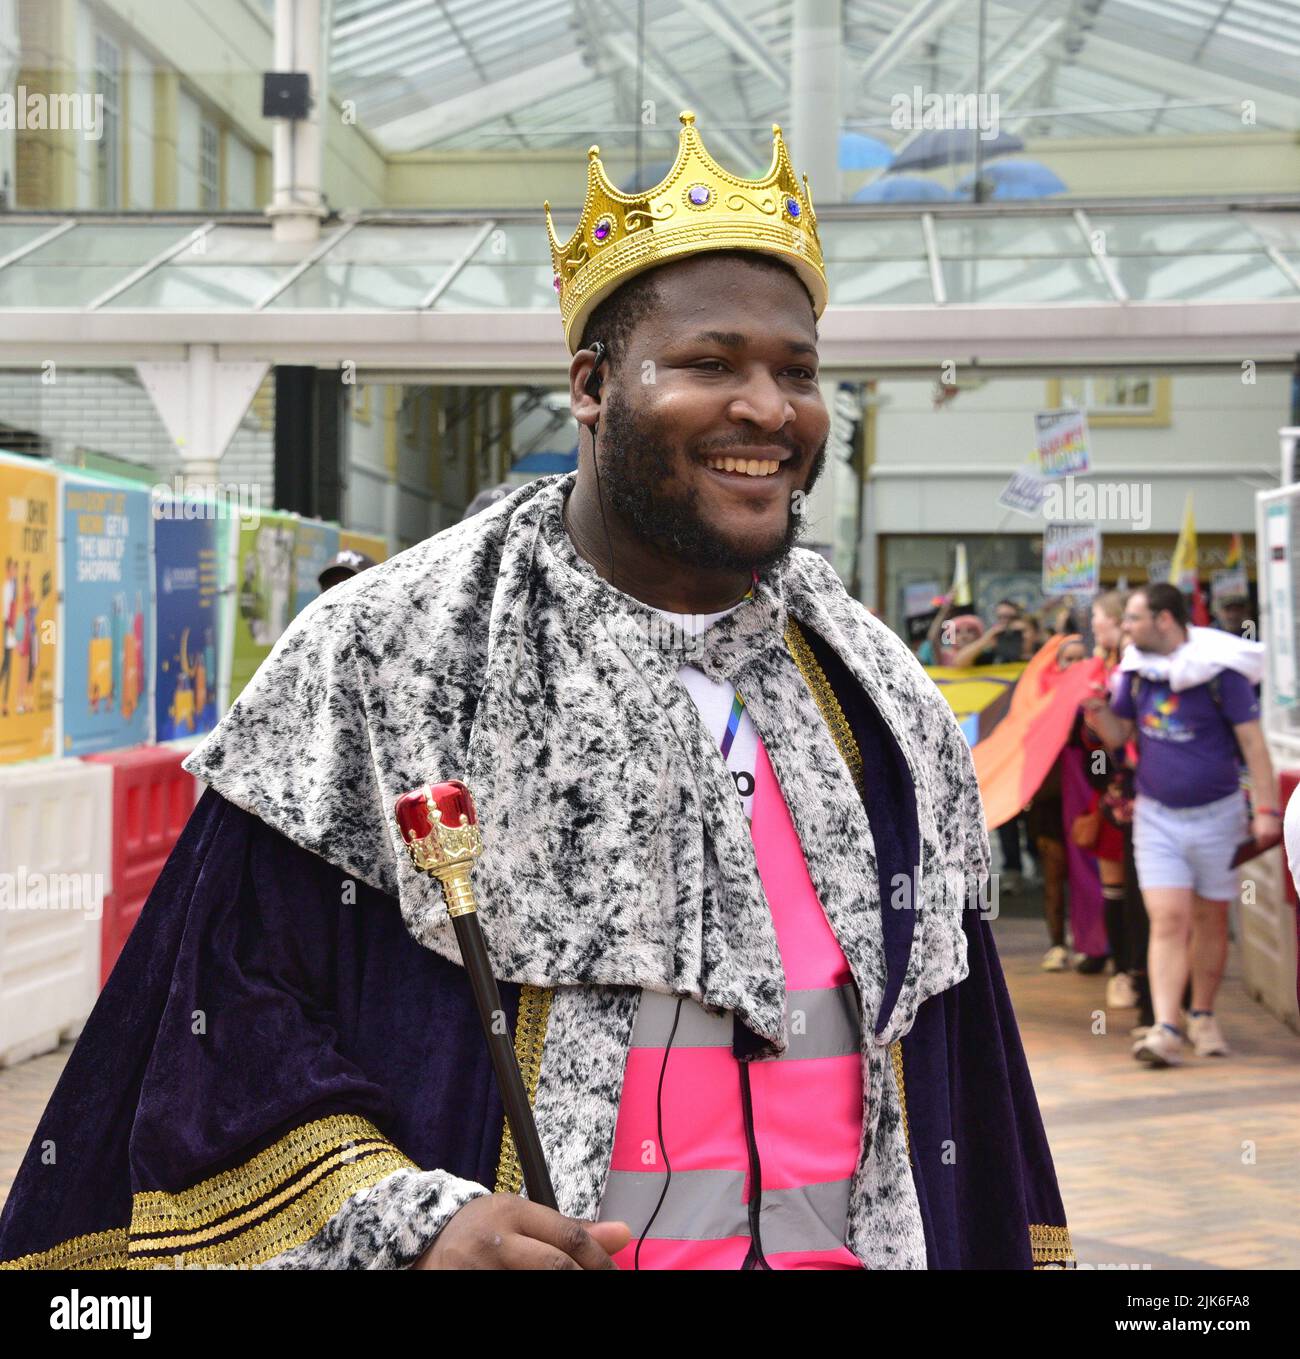 Stockport, UK, 31st July, 2022. Man wears crown and robe. Stockport LGBTQ+ Pride Parade in Stockport, Greater Manchester, England, United Kingdom, British Isles. Organisers say the parade is: 'Celebrating Stockport's LGBTQ+'. Community'. The parade marched from Bridgefield Street to Stockport's historic Market Place. Credit: Terry Waller/Alamy Live News Stock Photo